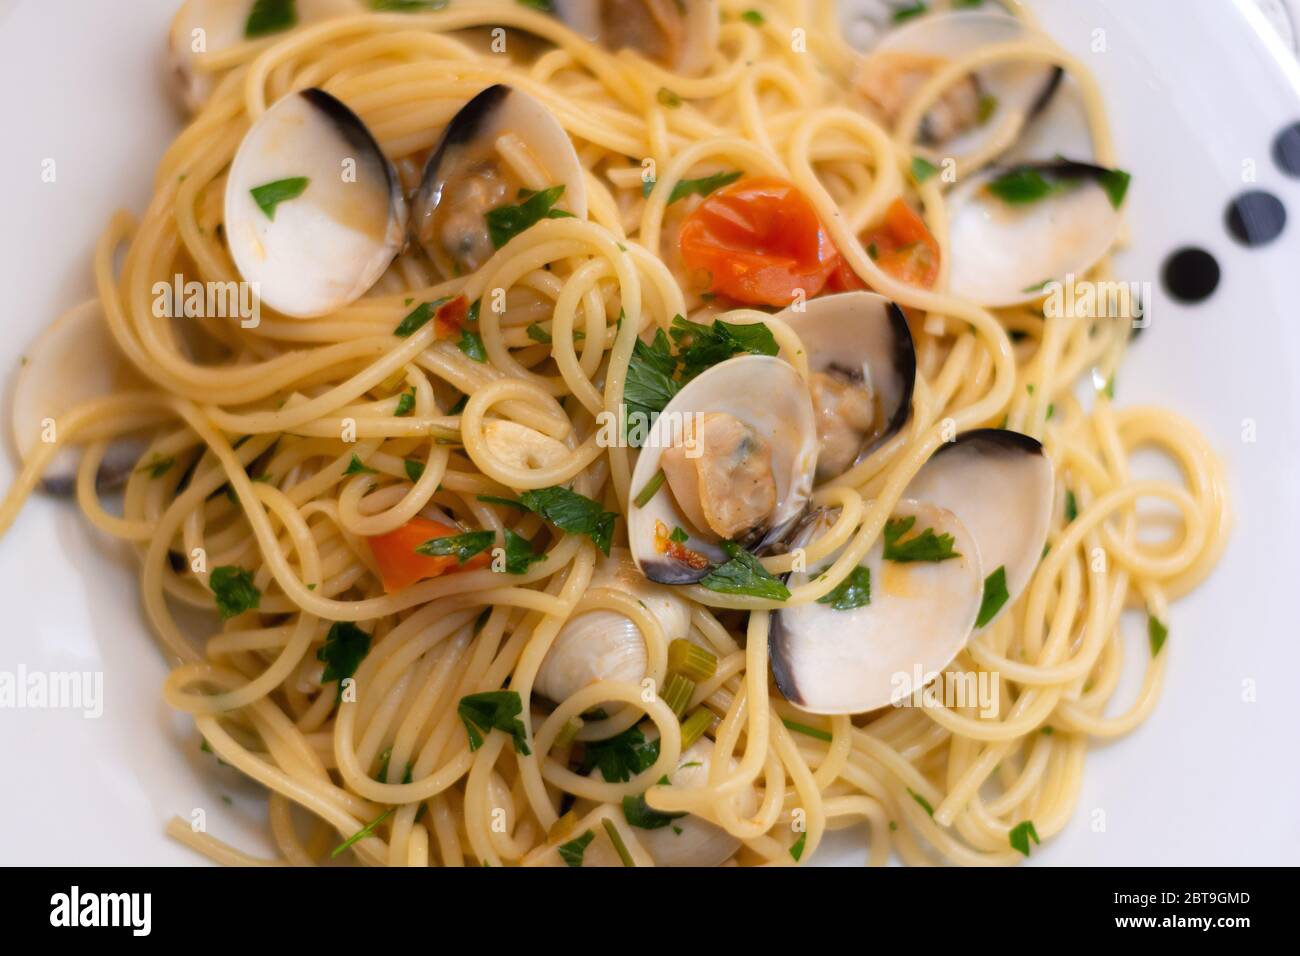 Spaghetti alle vongole, an italian traditional recipe with spaghettis, clams, tomatoes, garlic, chilli, parsley and white wine Stock Photo